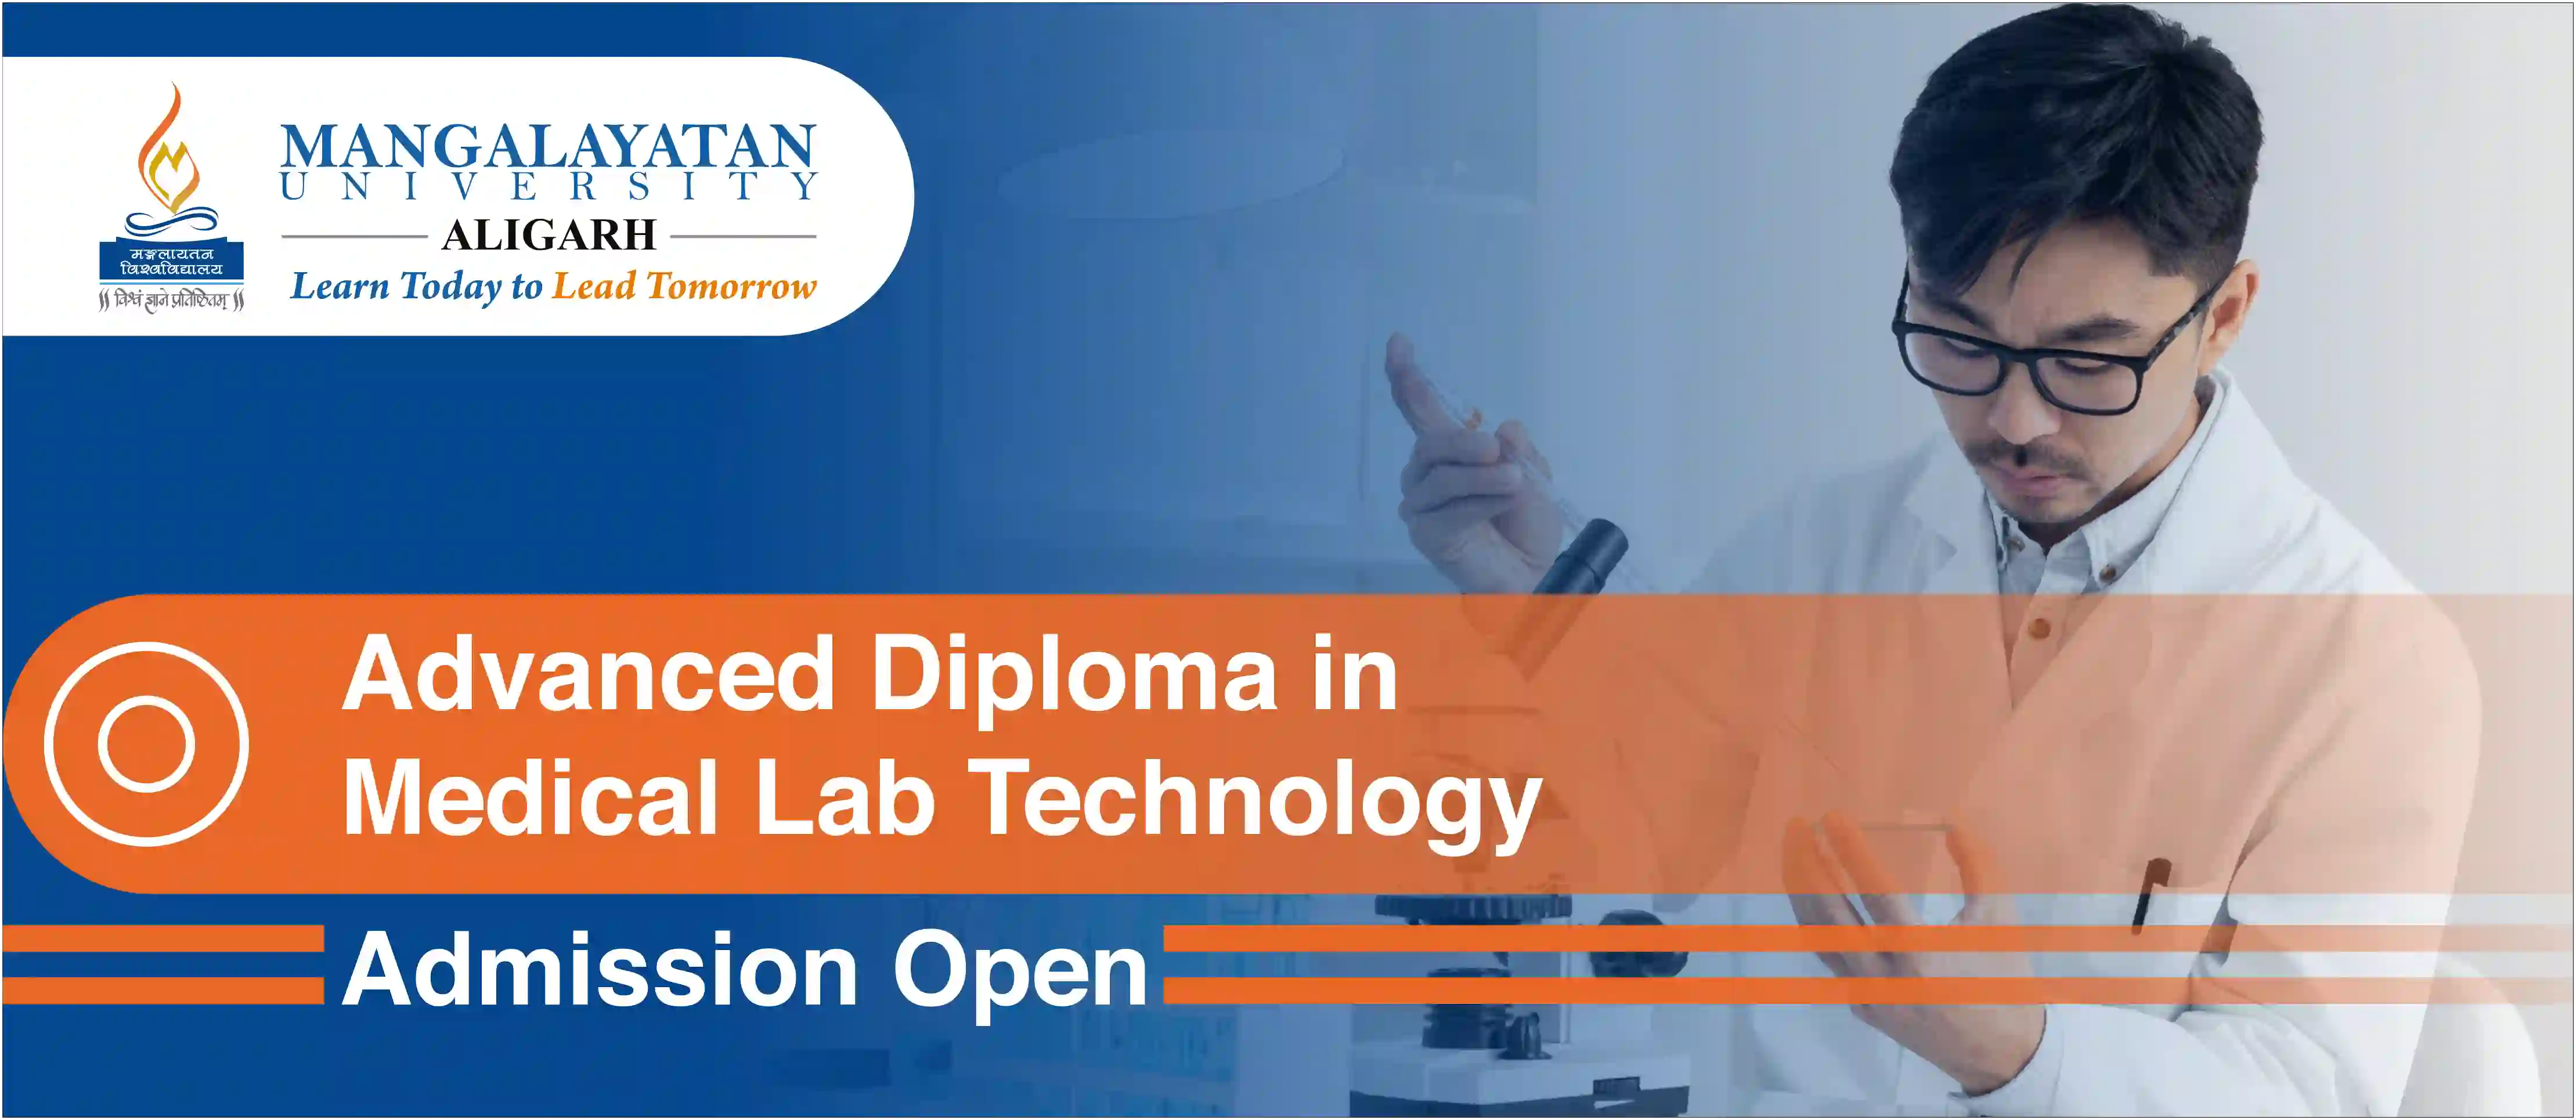 Advanced Diploma in Medical Lab Technology (ADMLT) Admission